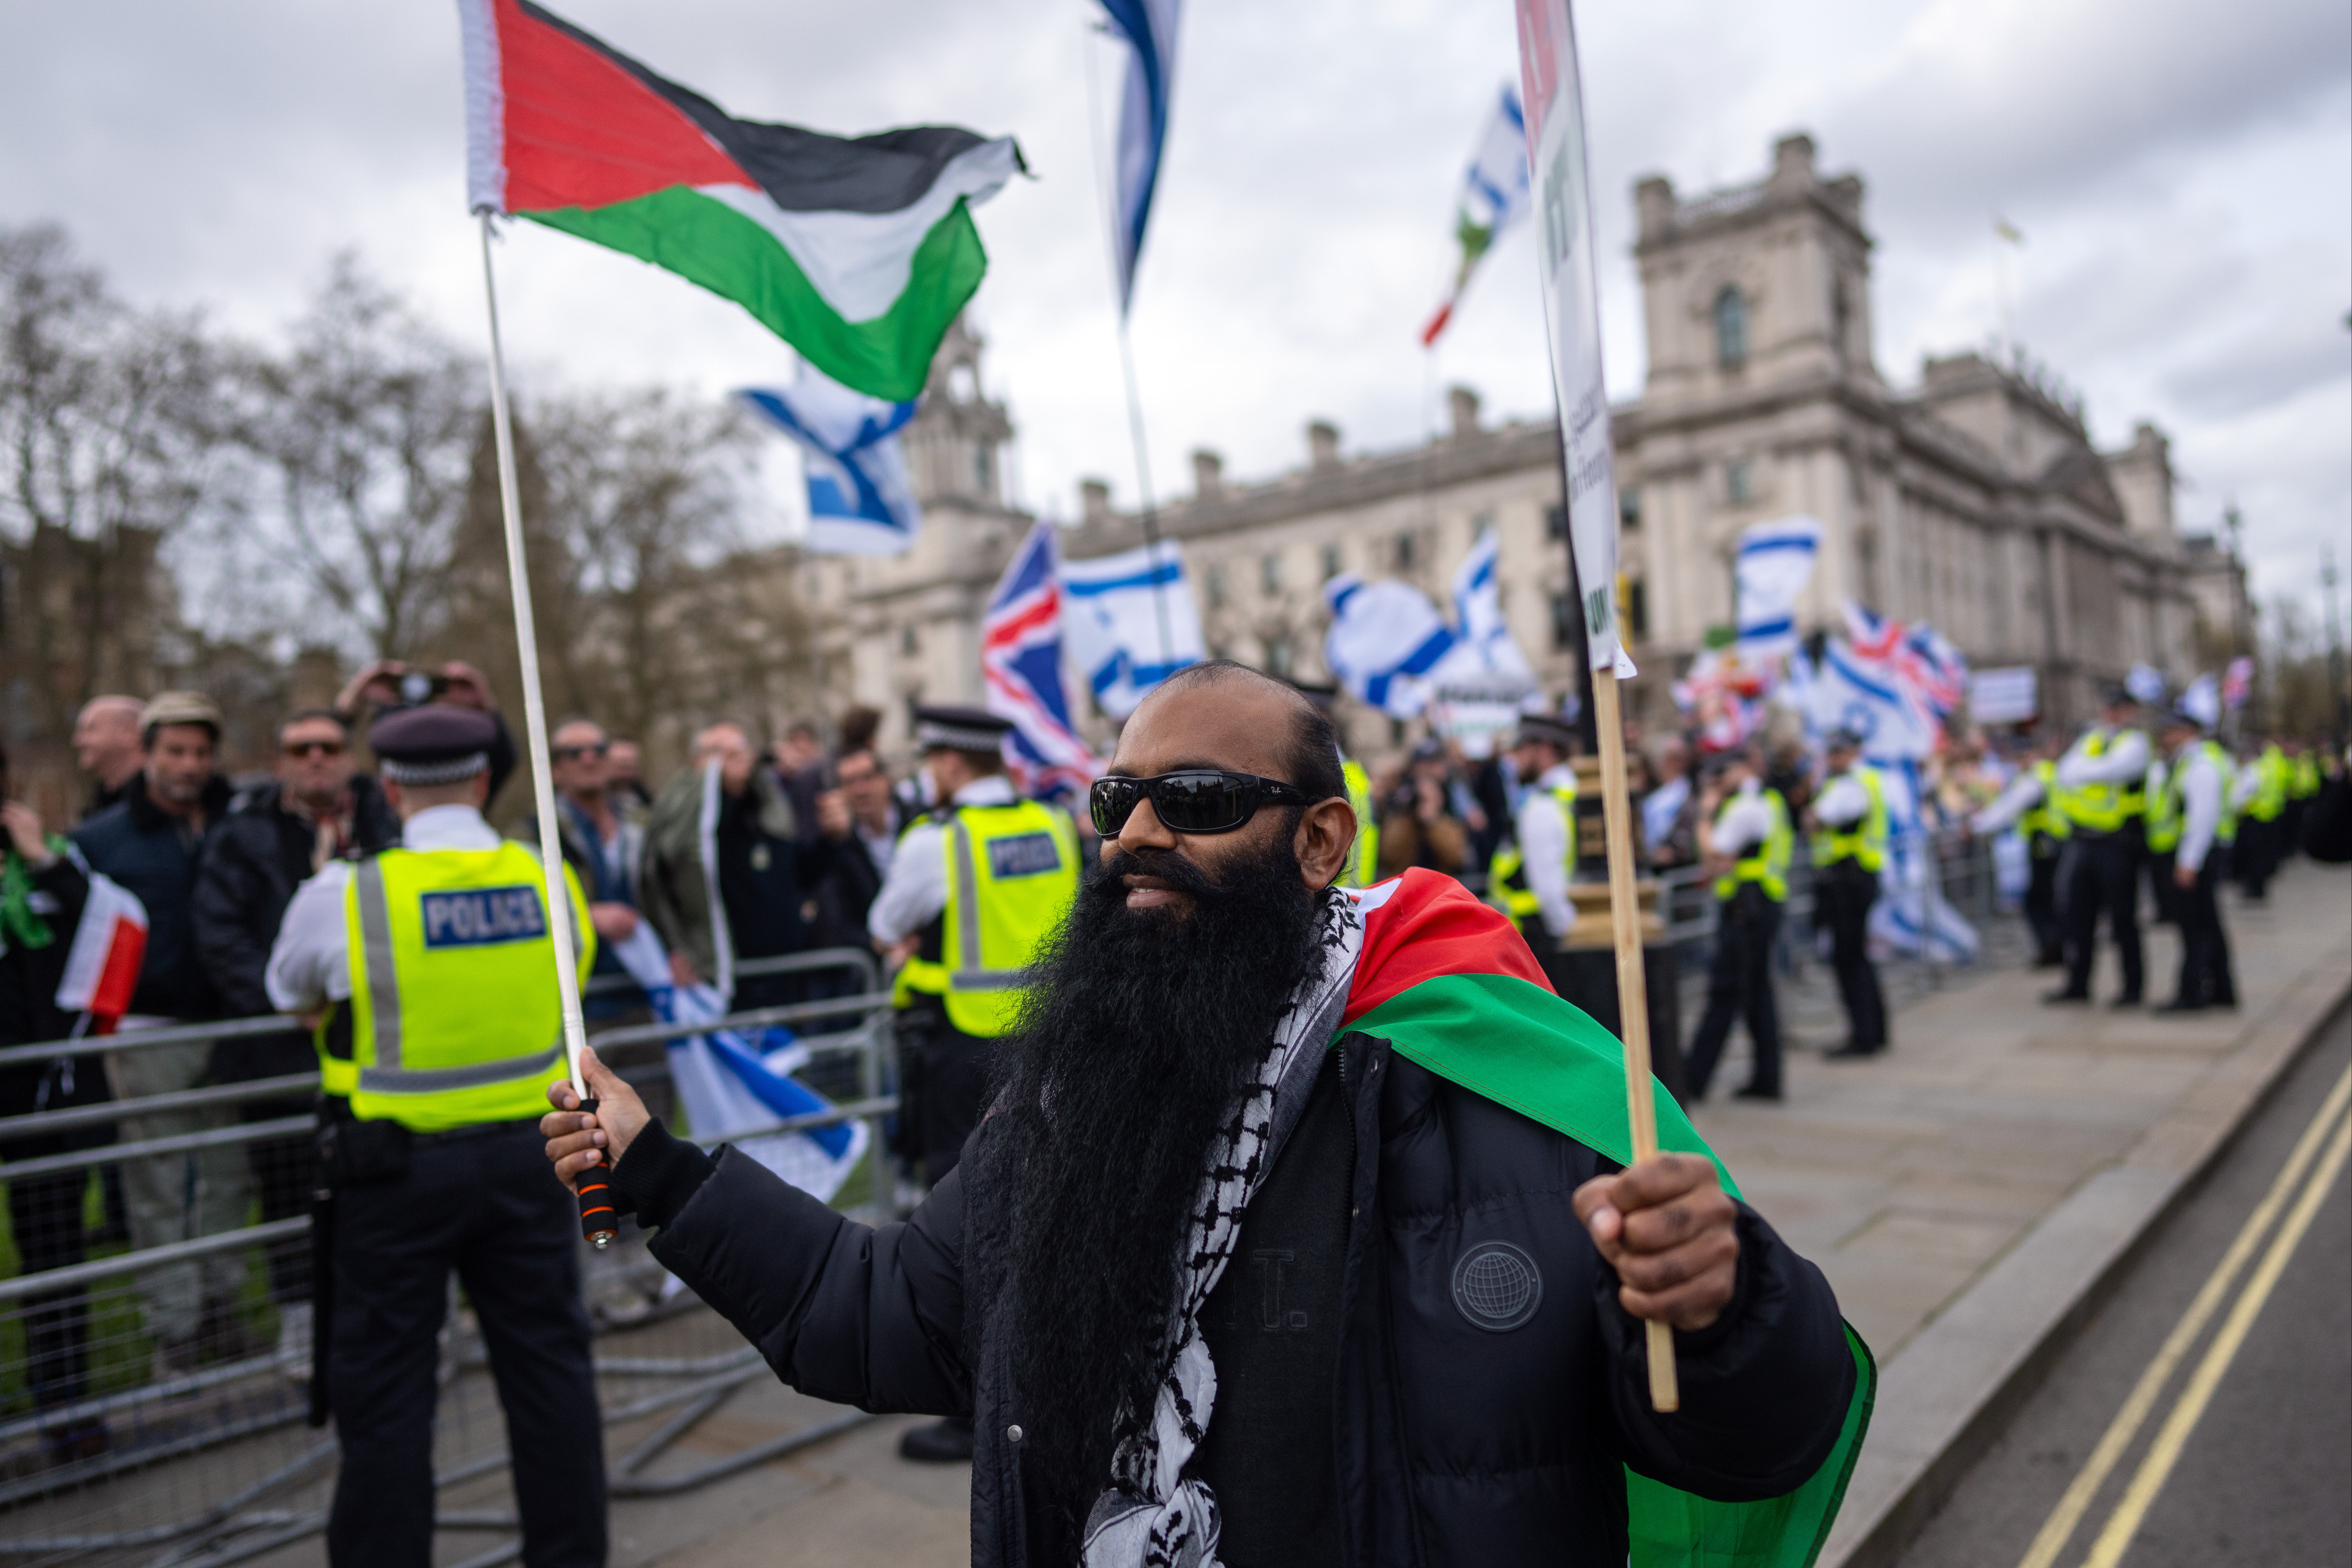 A man waving Palestinian flags walks past pro-Israel supporters during a march to mark Al Quds Day